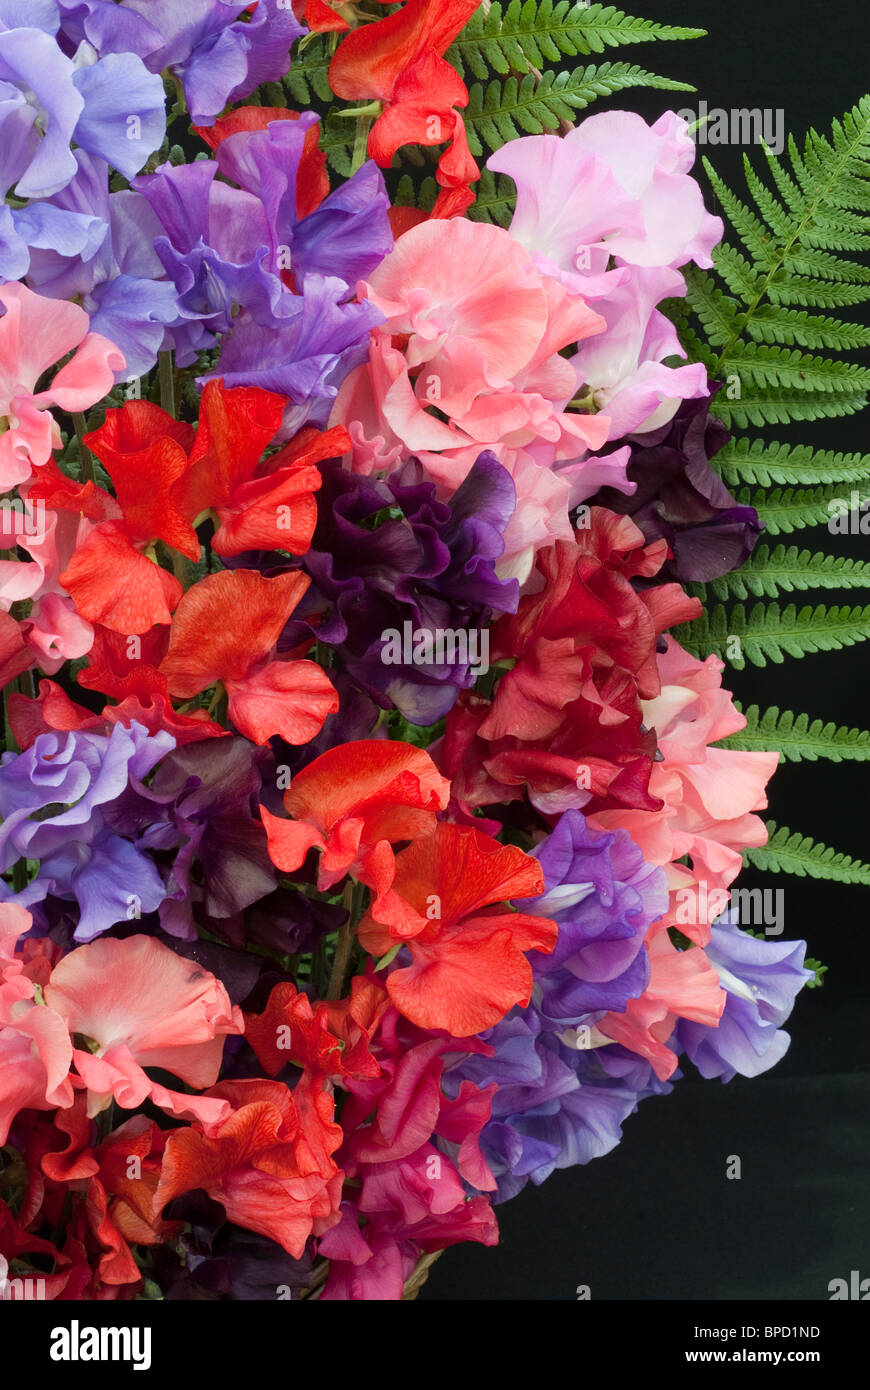 Lathyrus odoratus (Sweet pea) 'Spencer Mixed' in bouquet floral arrangement with fern against black background Stock Photo